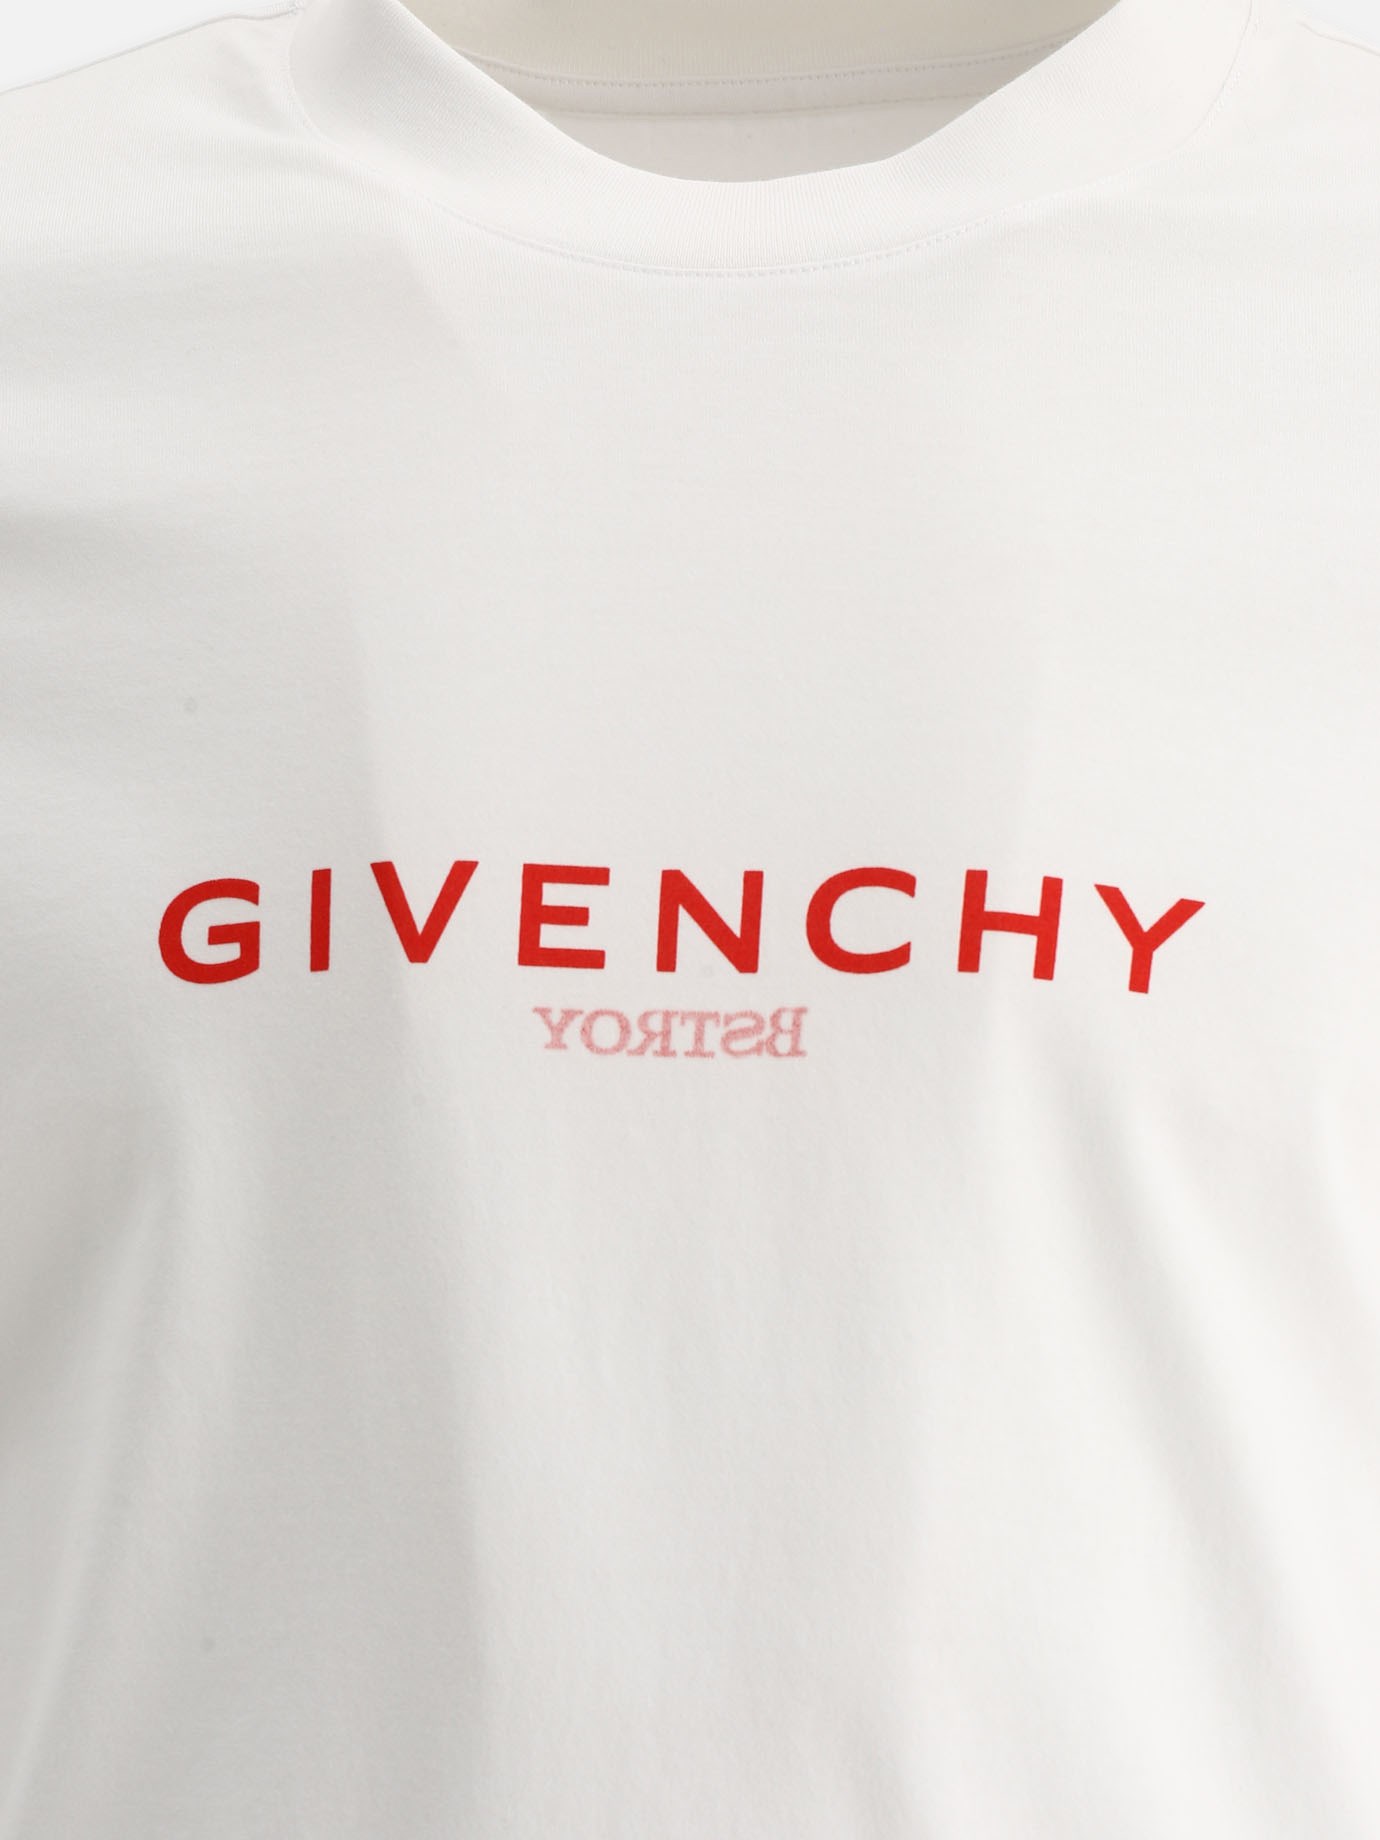 T-shirt reverse  BSTROY x Givenchy  by Givenchy